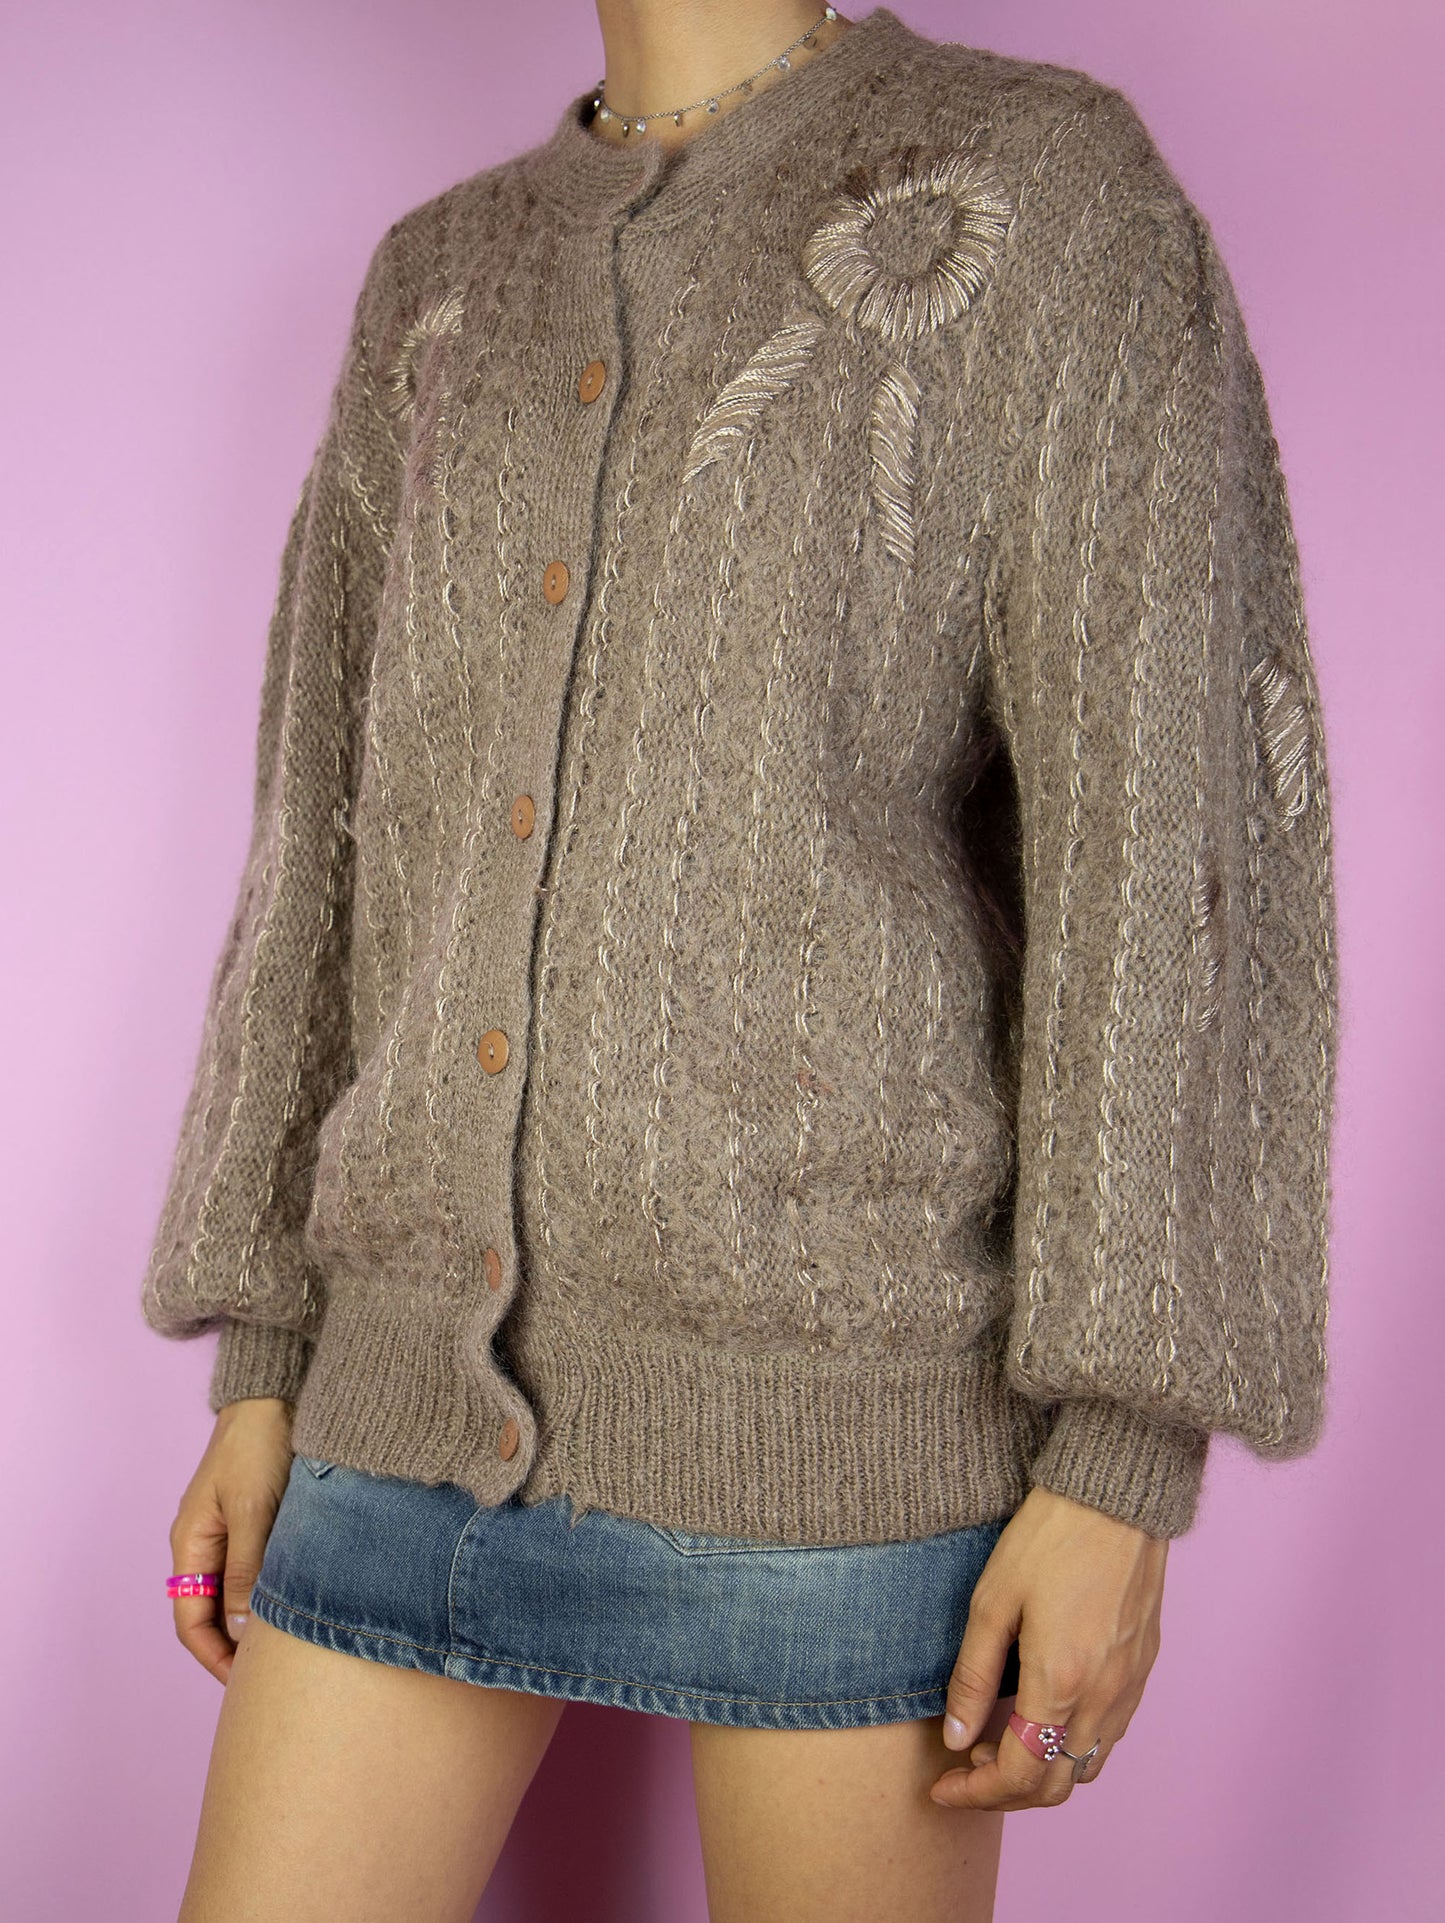 The Vintage 90s Brown Mohair Knit Cardigan is a mohair blend cardigan featuring puff sleeves. Boho retro 1990s wool sweater.